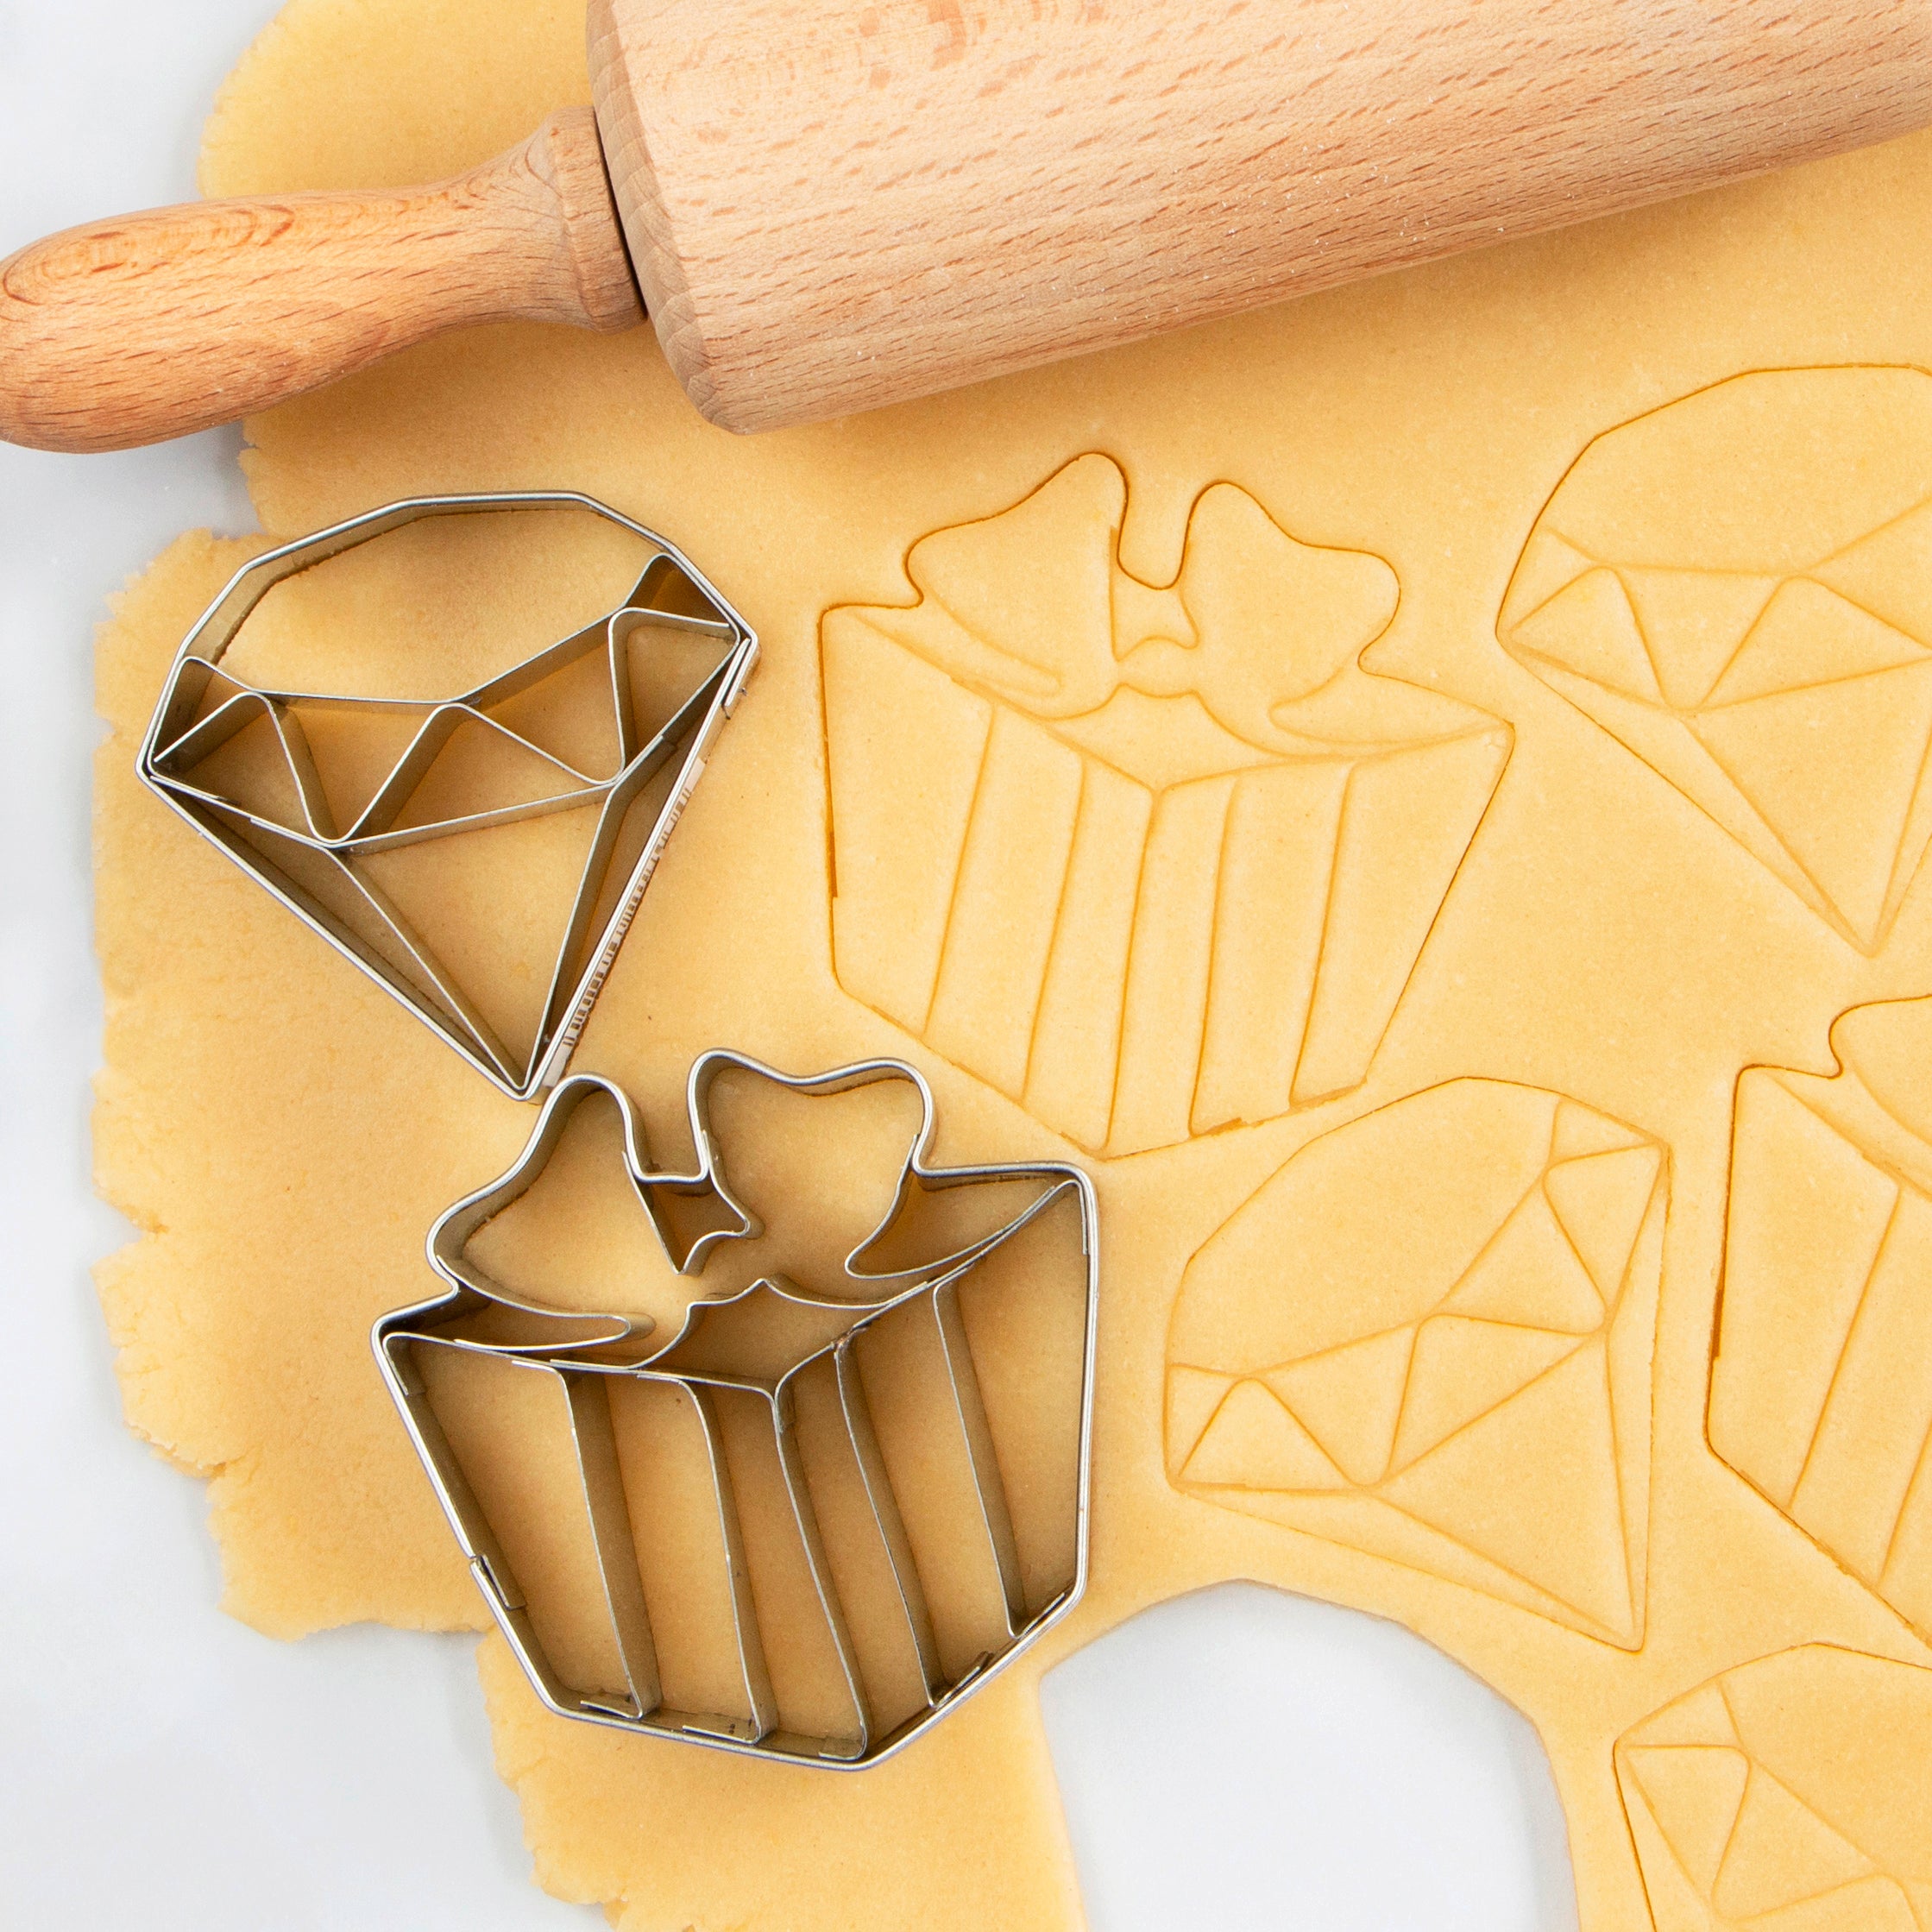 STÄDTER Gifts embossing cookie cutter